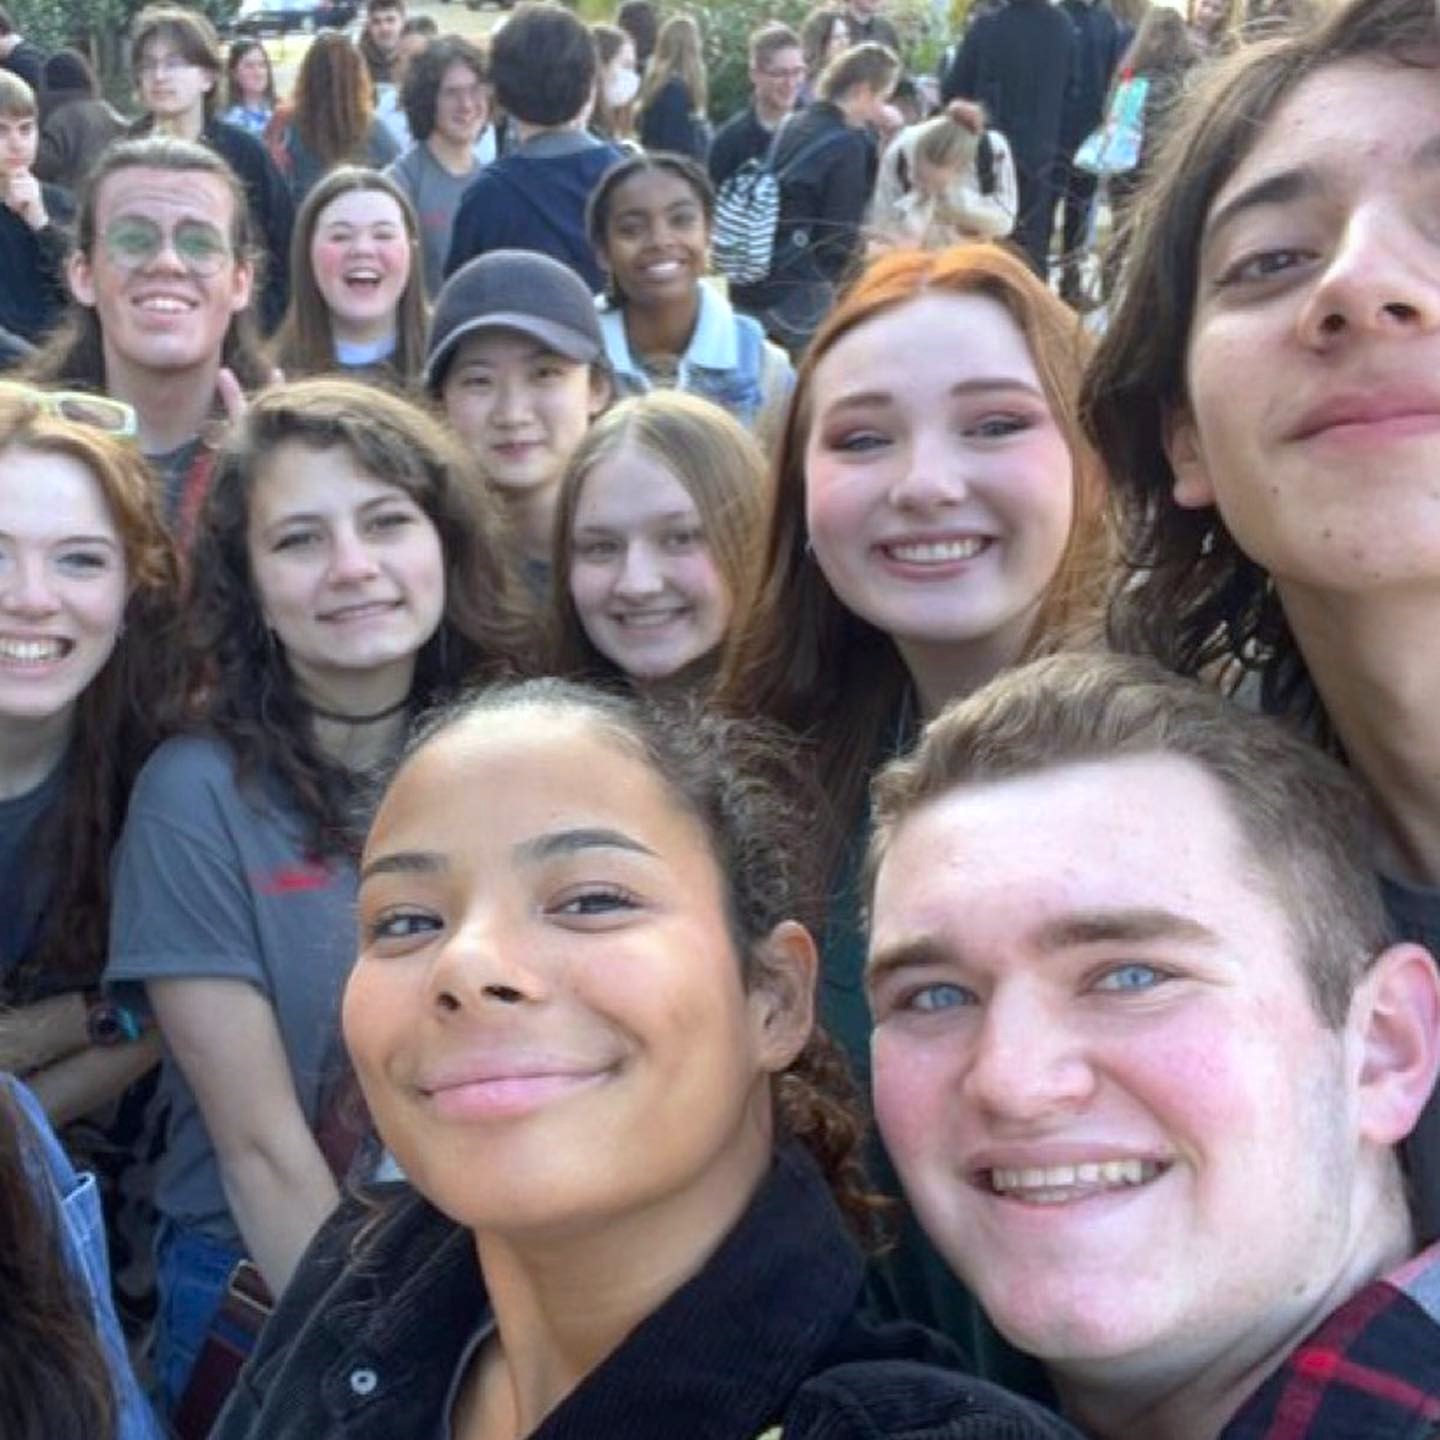 James Clemens Theatre claims awards at state Trumbauer festival The